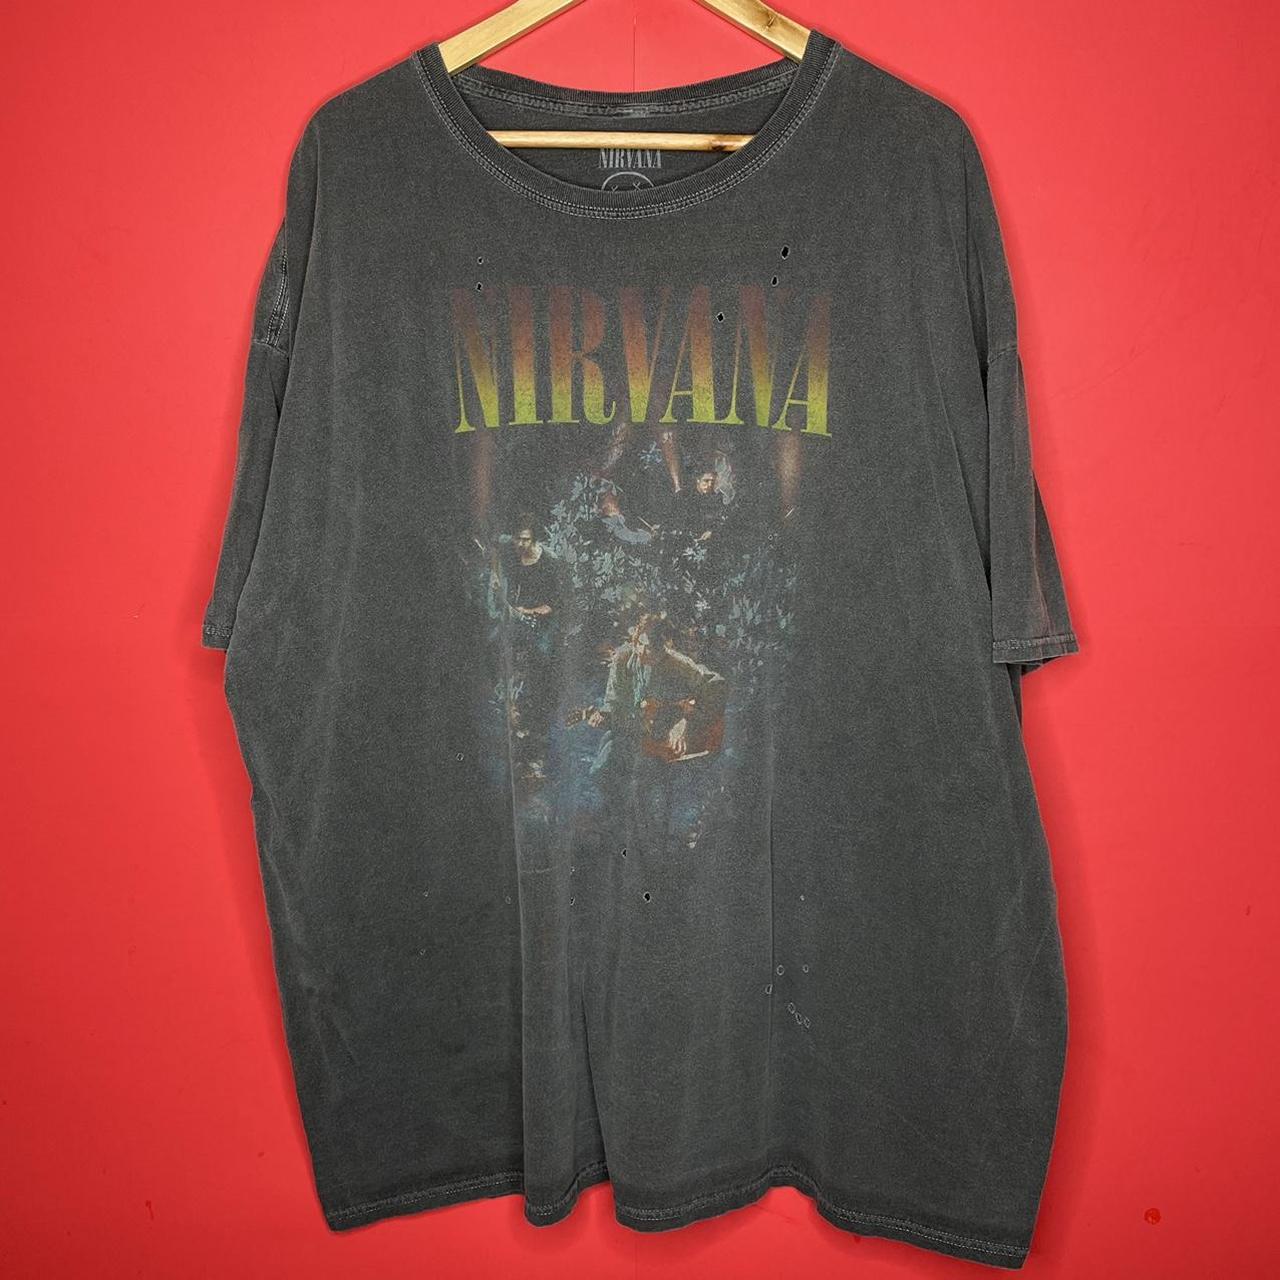 Product Image 1 - Modern Nirvana MTV Unplugged In